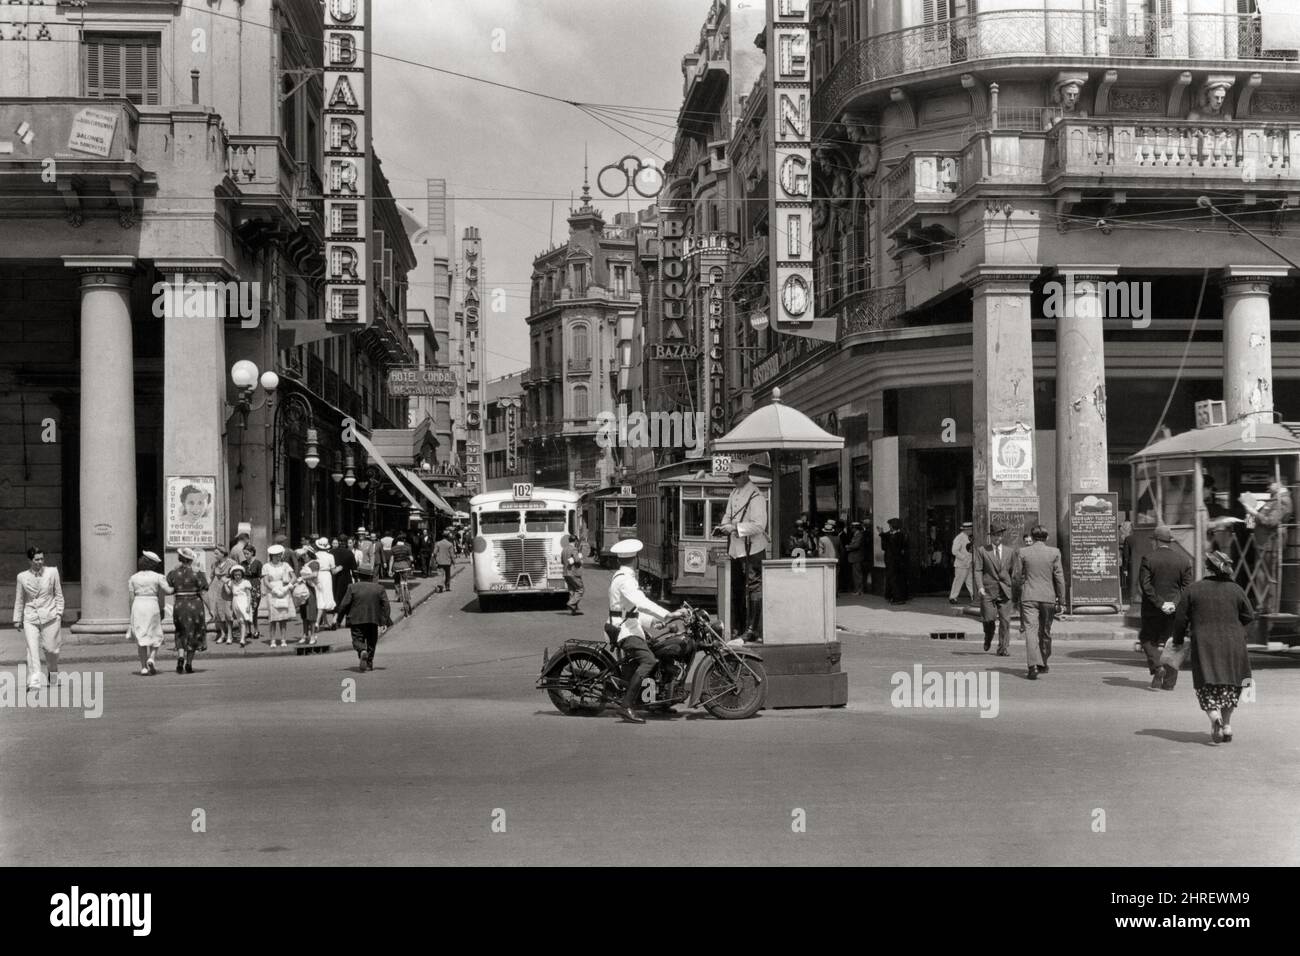 1930s 1940s DOWNTOWN INTERSECTION PEDESTRIANS TROLLEY AND BUS TRAFFIC TWO POLICE AT PLAZA INDEPENDENCIA IN MONTEVIDEO URUGUAY - r12410 PAL001 HARS SKYLINE SERVE VEHICLE SAFETY LIFESTYLE HISTORY FEMALES JOBS COPY SPACE FULL-LENGTH LADIES PERSONS AUTOMOBILE MALES ORDER OFFICER TRANSPORTATION B&W COP DOWNTOWN SOUTH AMERICA SKILL OCCUPATION PROTECT SKILLS INTERSECTION PROTECTION AND AUTOS PROGRESS DIRECTION PRIDE AUTHORITY OCCUPATIONS TROLLEY UNIFORMS CONCEPTUAL AUTOMOBILES STYLISH VEHICLES PLAZA OFFICERS POLICEMEN COPS BADGE BADGES BLACK AND WHITE OLD FASHIONED Stock Photo